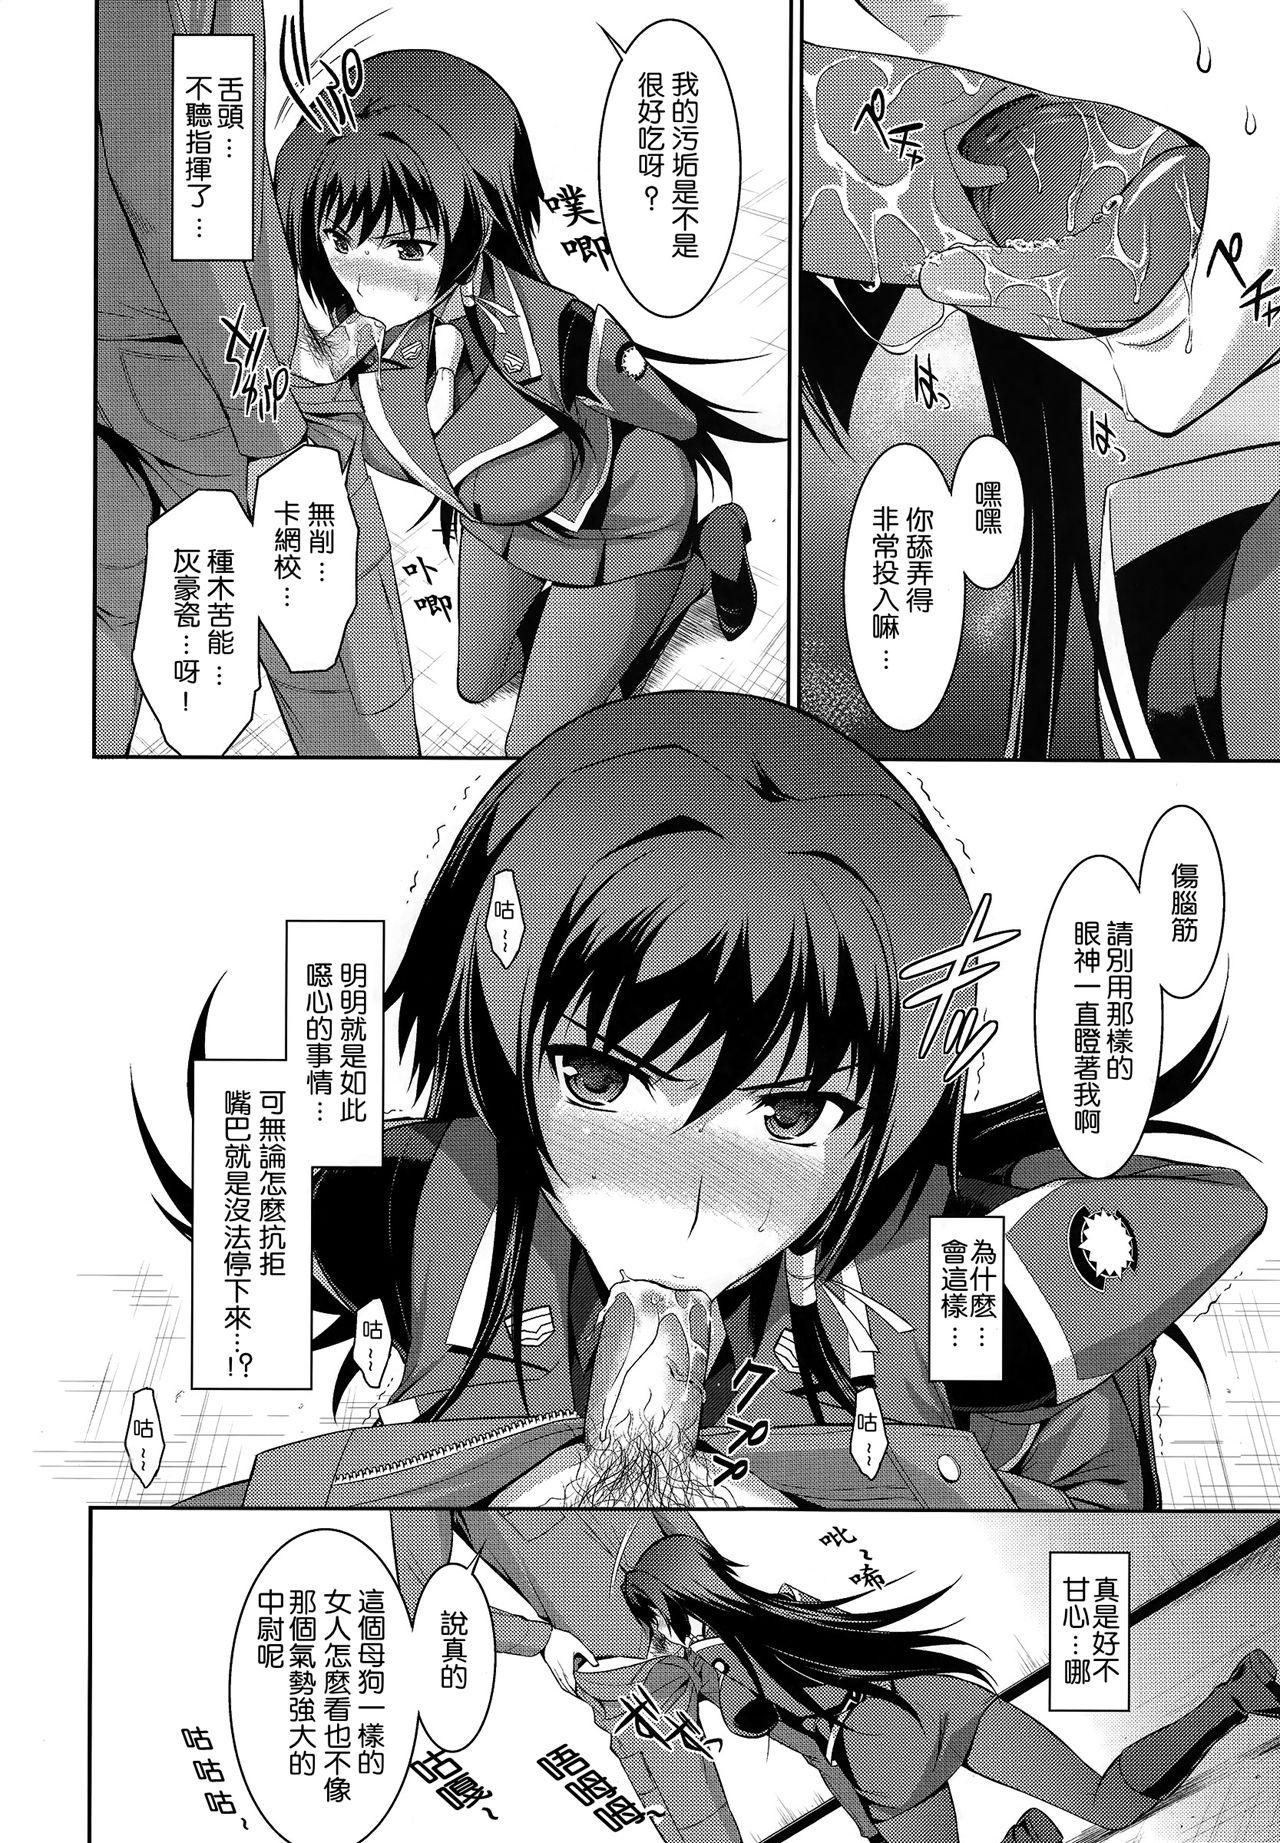 Oldyoung Ouka Chiru! - Muv luv alternative total eclipse Gay Cut - Page 12